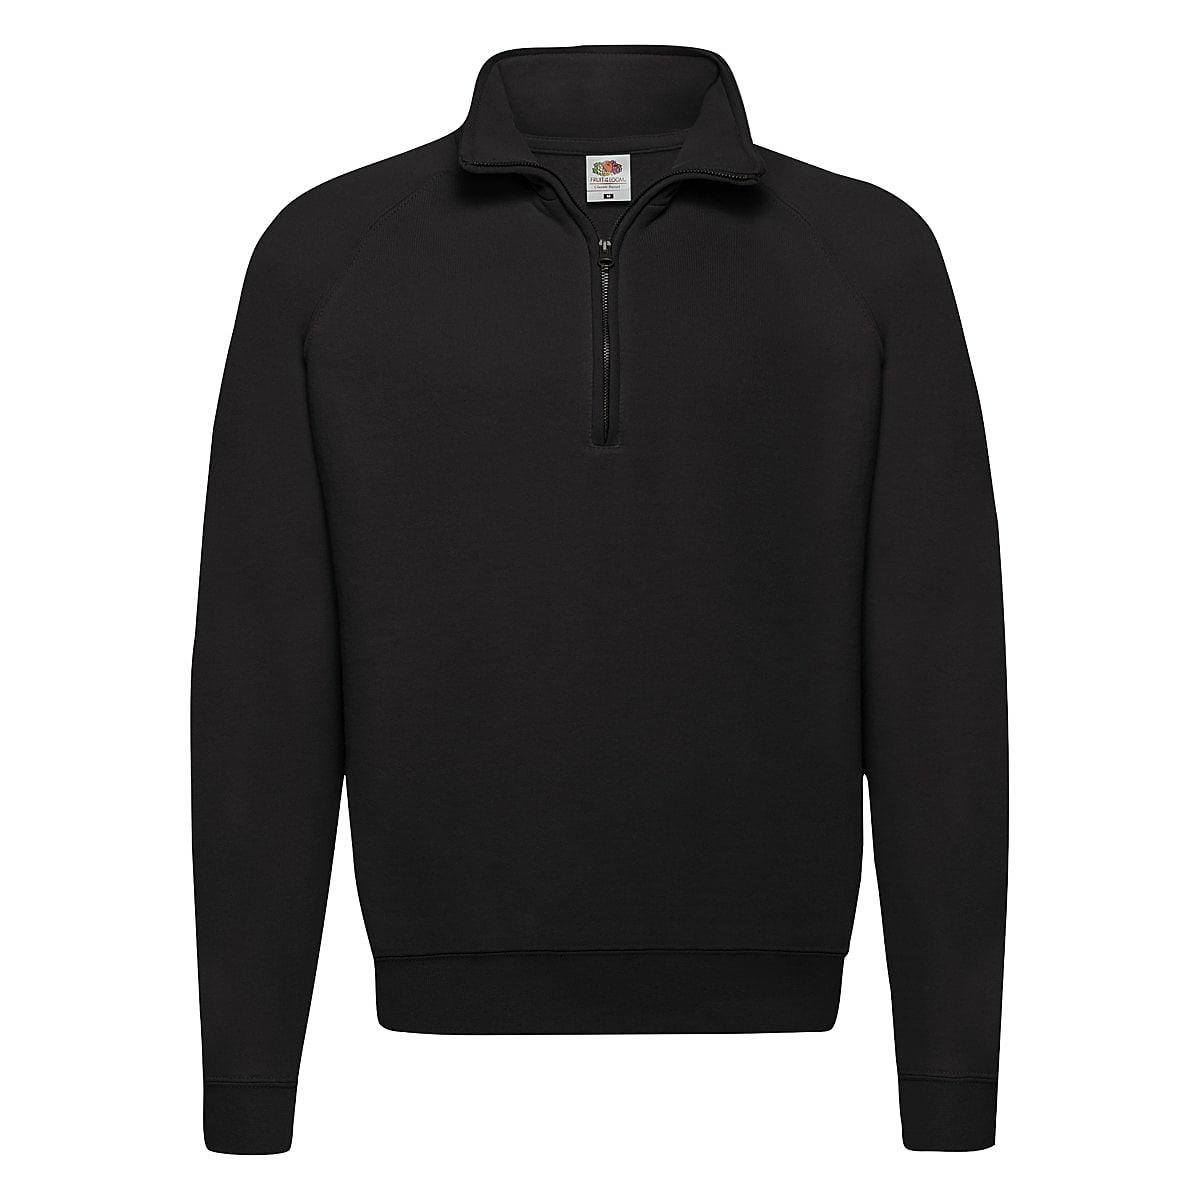 Fruit Of The Loom Mens Classic Zip Neck Sweater in Black (Product Code: 62114)